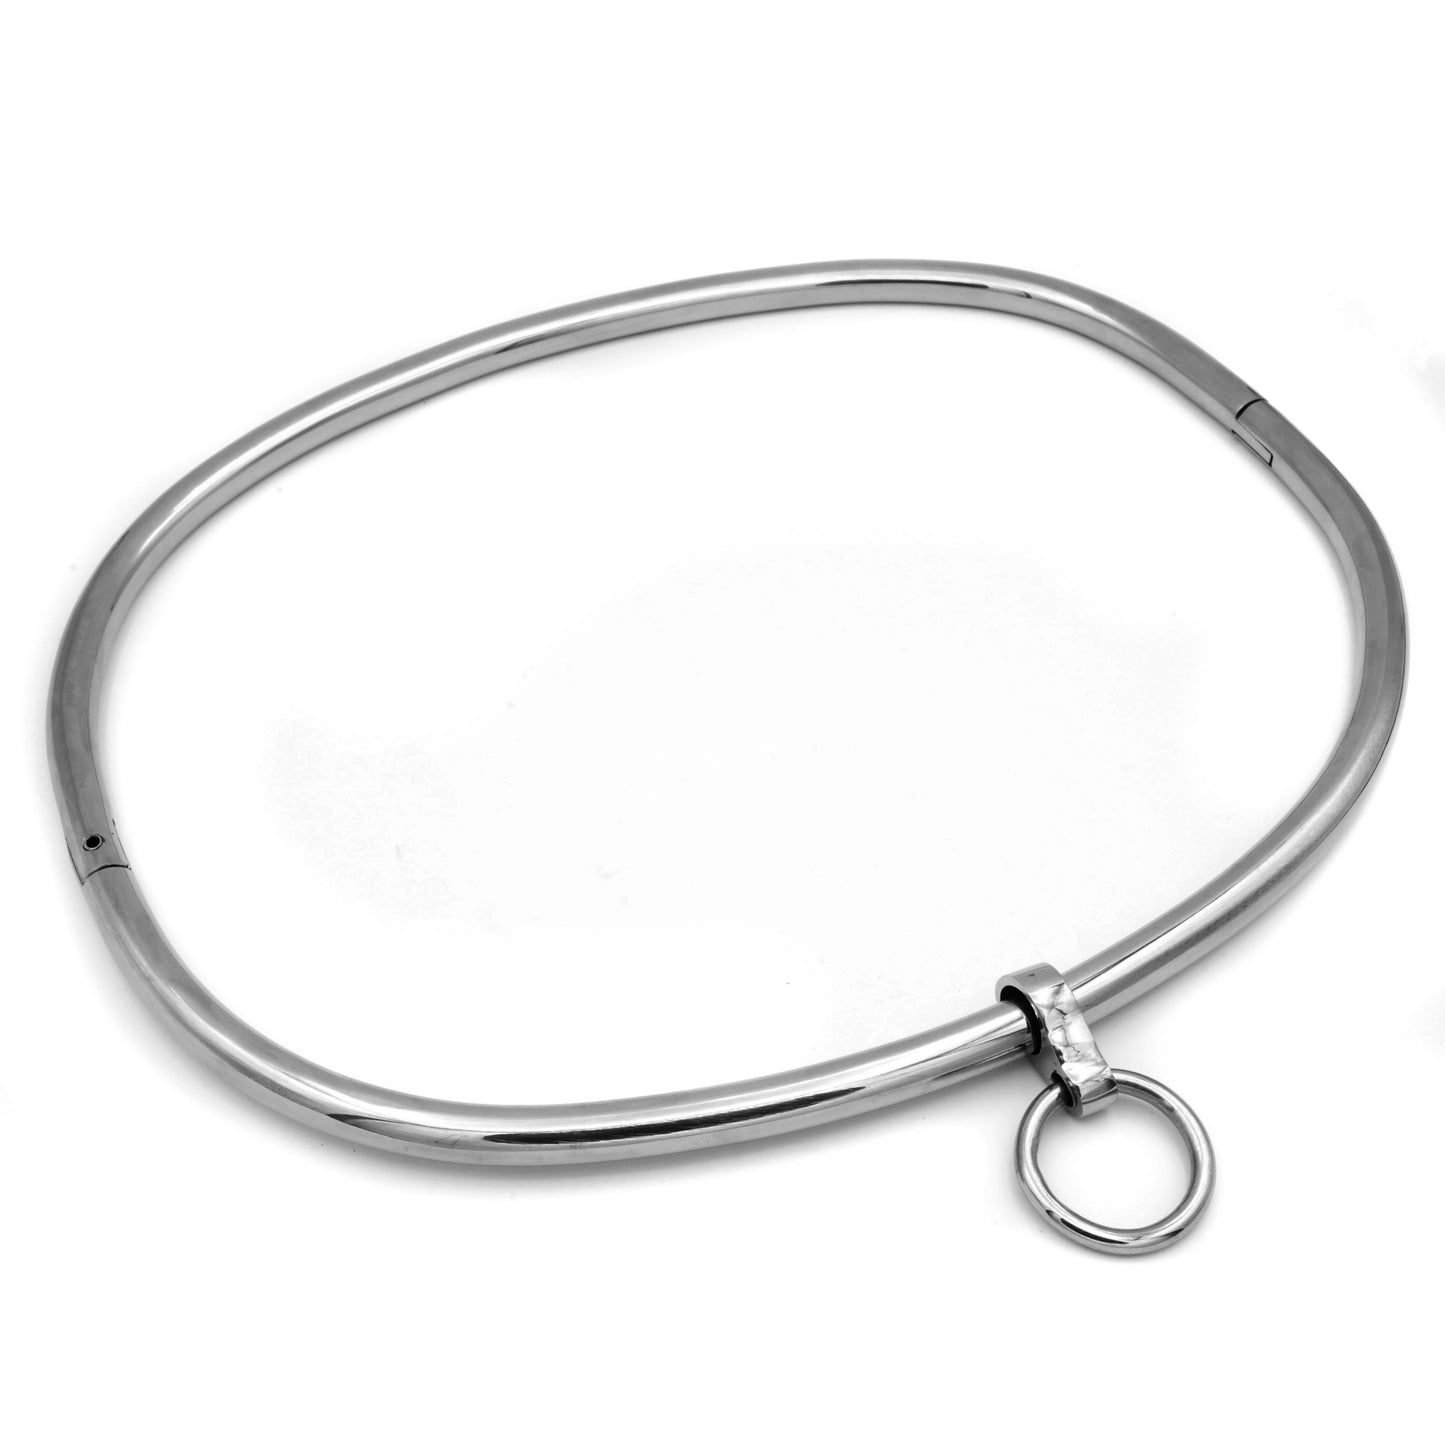 Stainless steel lockable belt, waist restraint, with O-ring